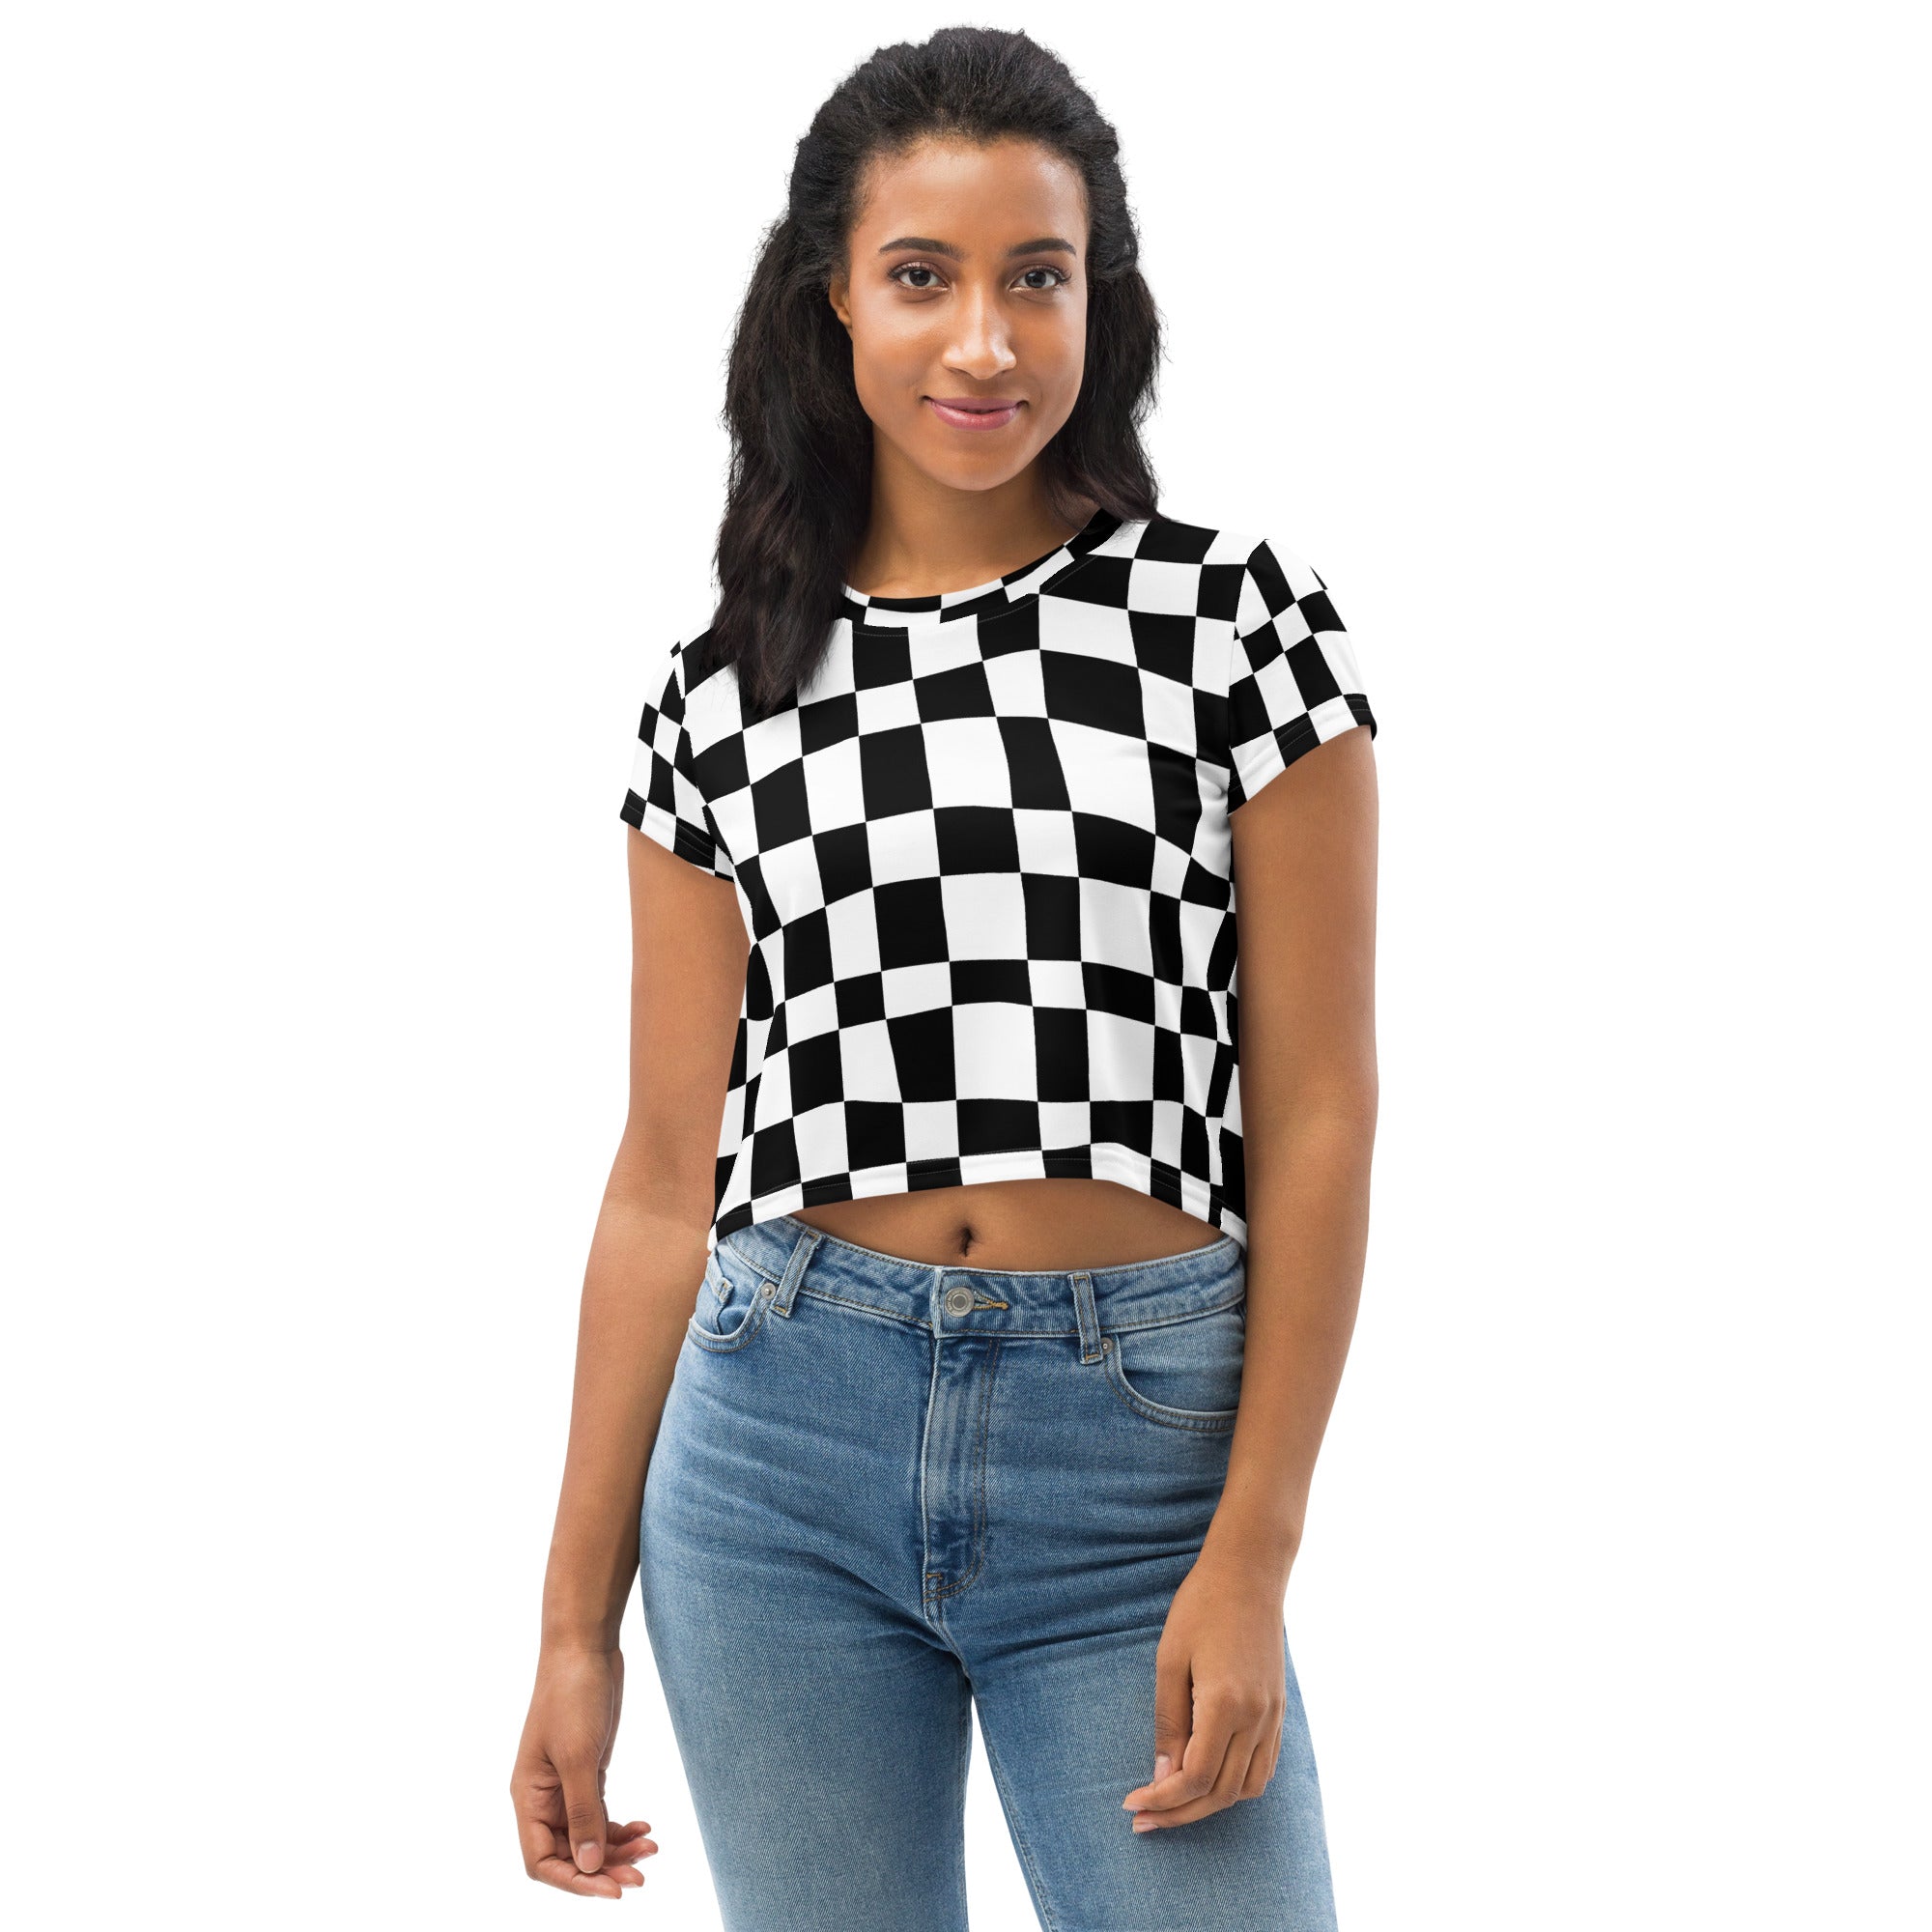 checkered black and white All-Over Print Crop Tee